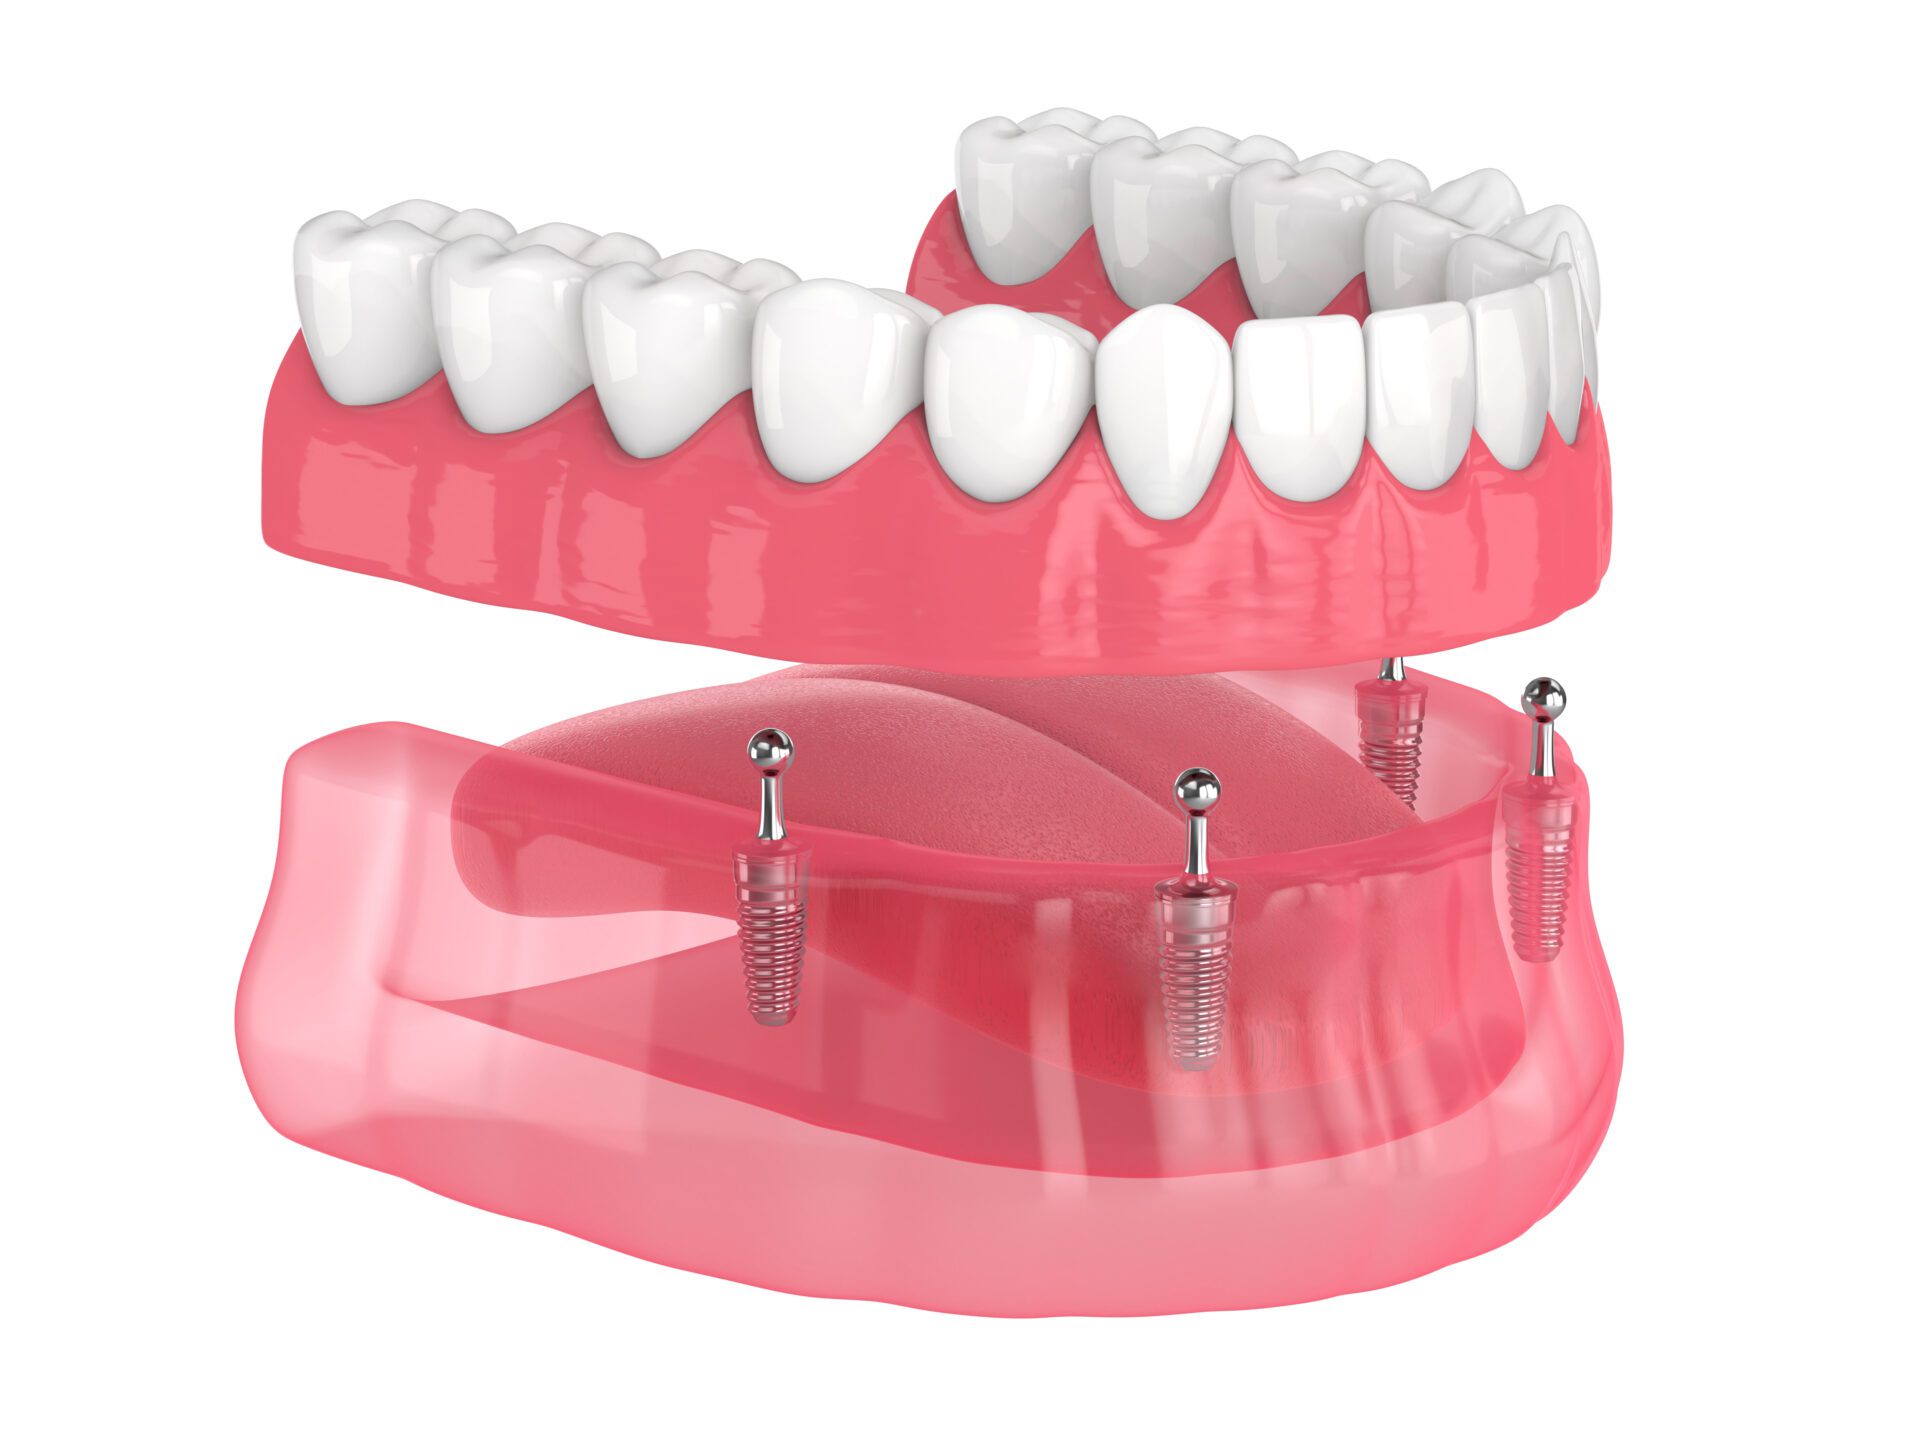 All-on-4 removable, implants supported, overdenture installation in Ocala, FL